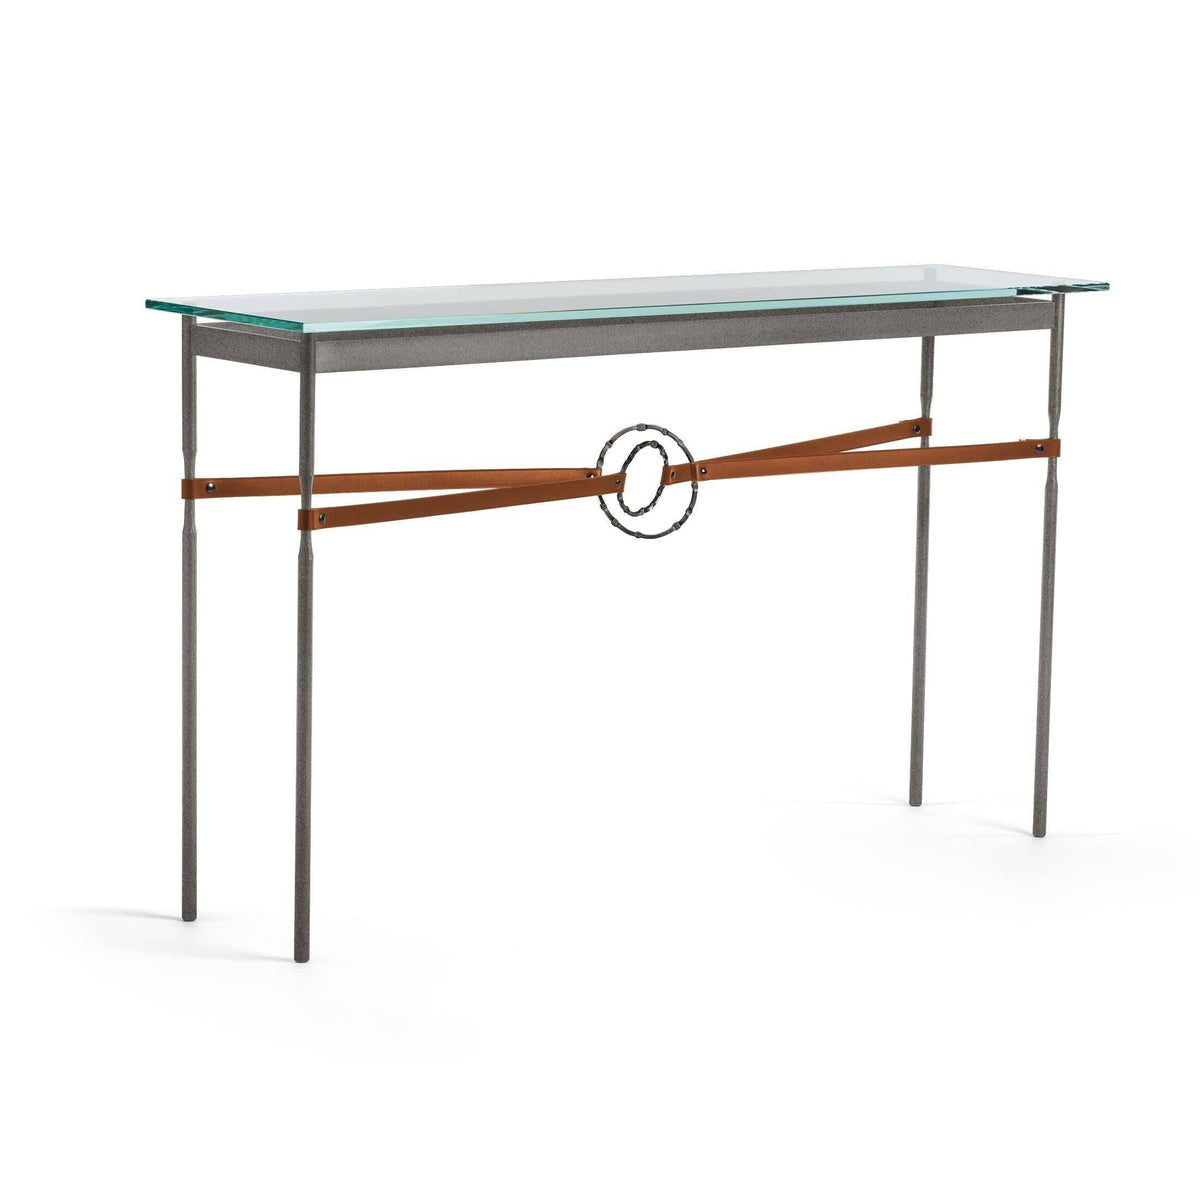 Hubbardton Forge - Equus Chestnut Leather Console Table - 750118-20-07-LC-VA0714 | Montreal Lighting & Hardware